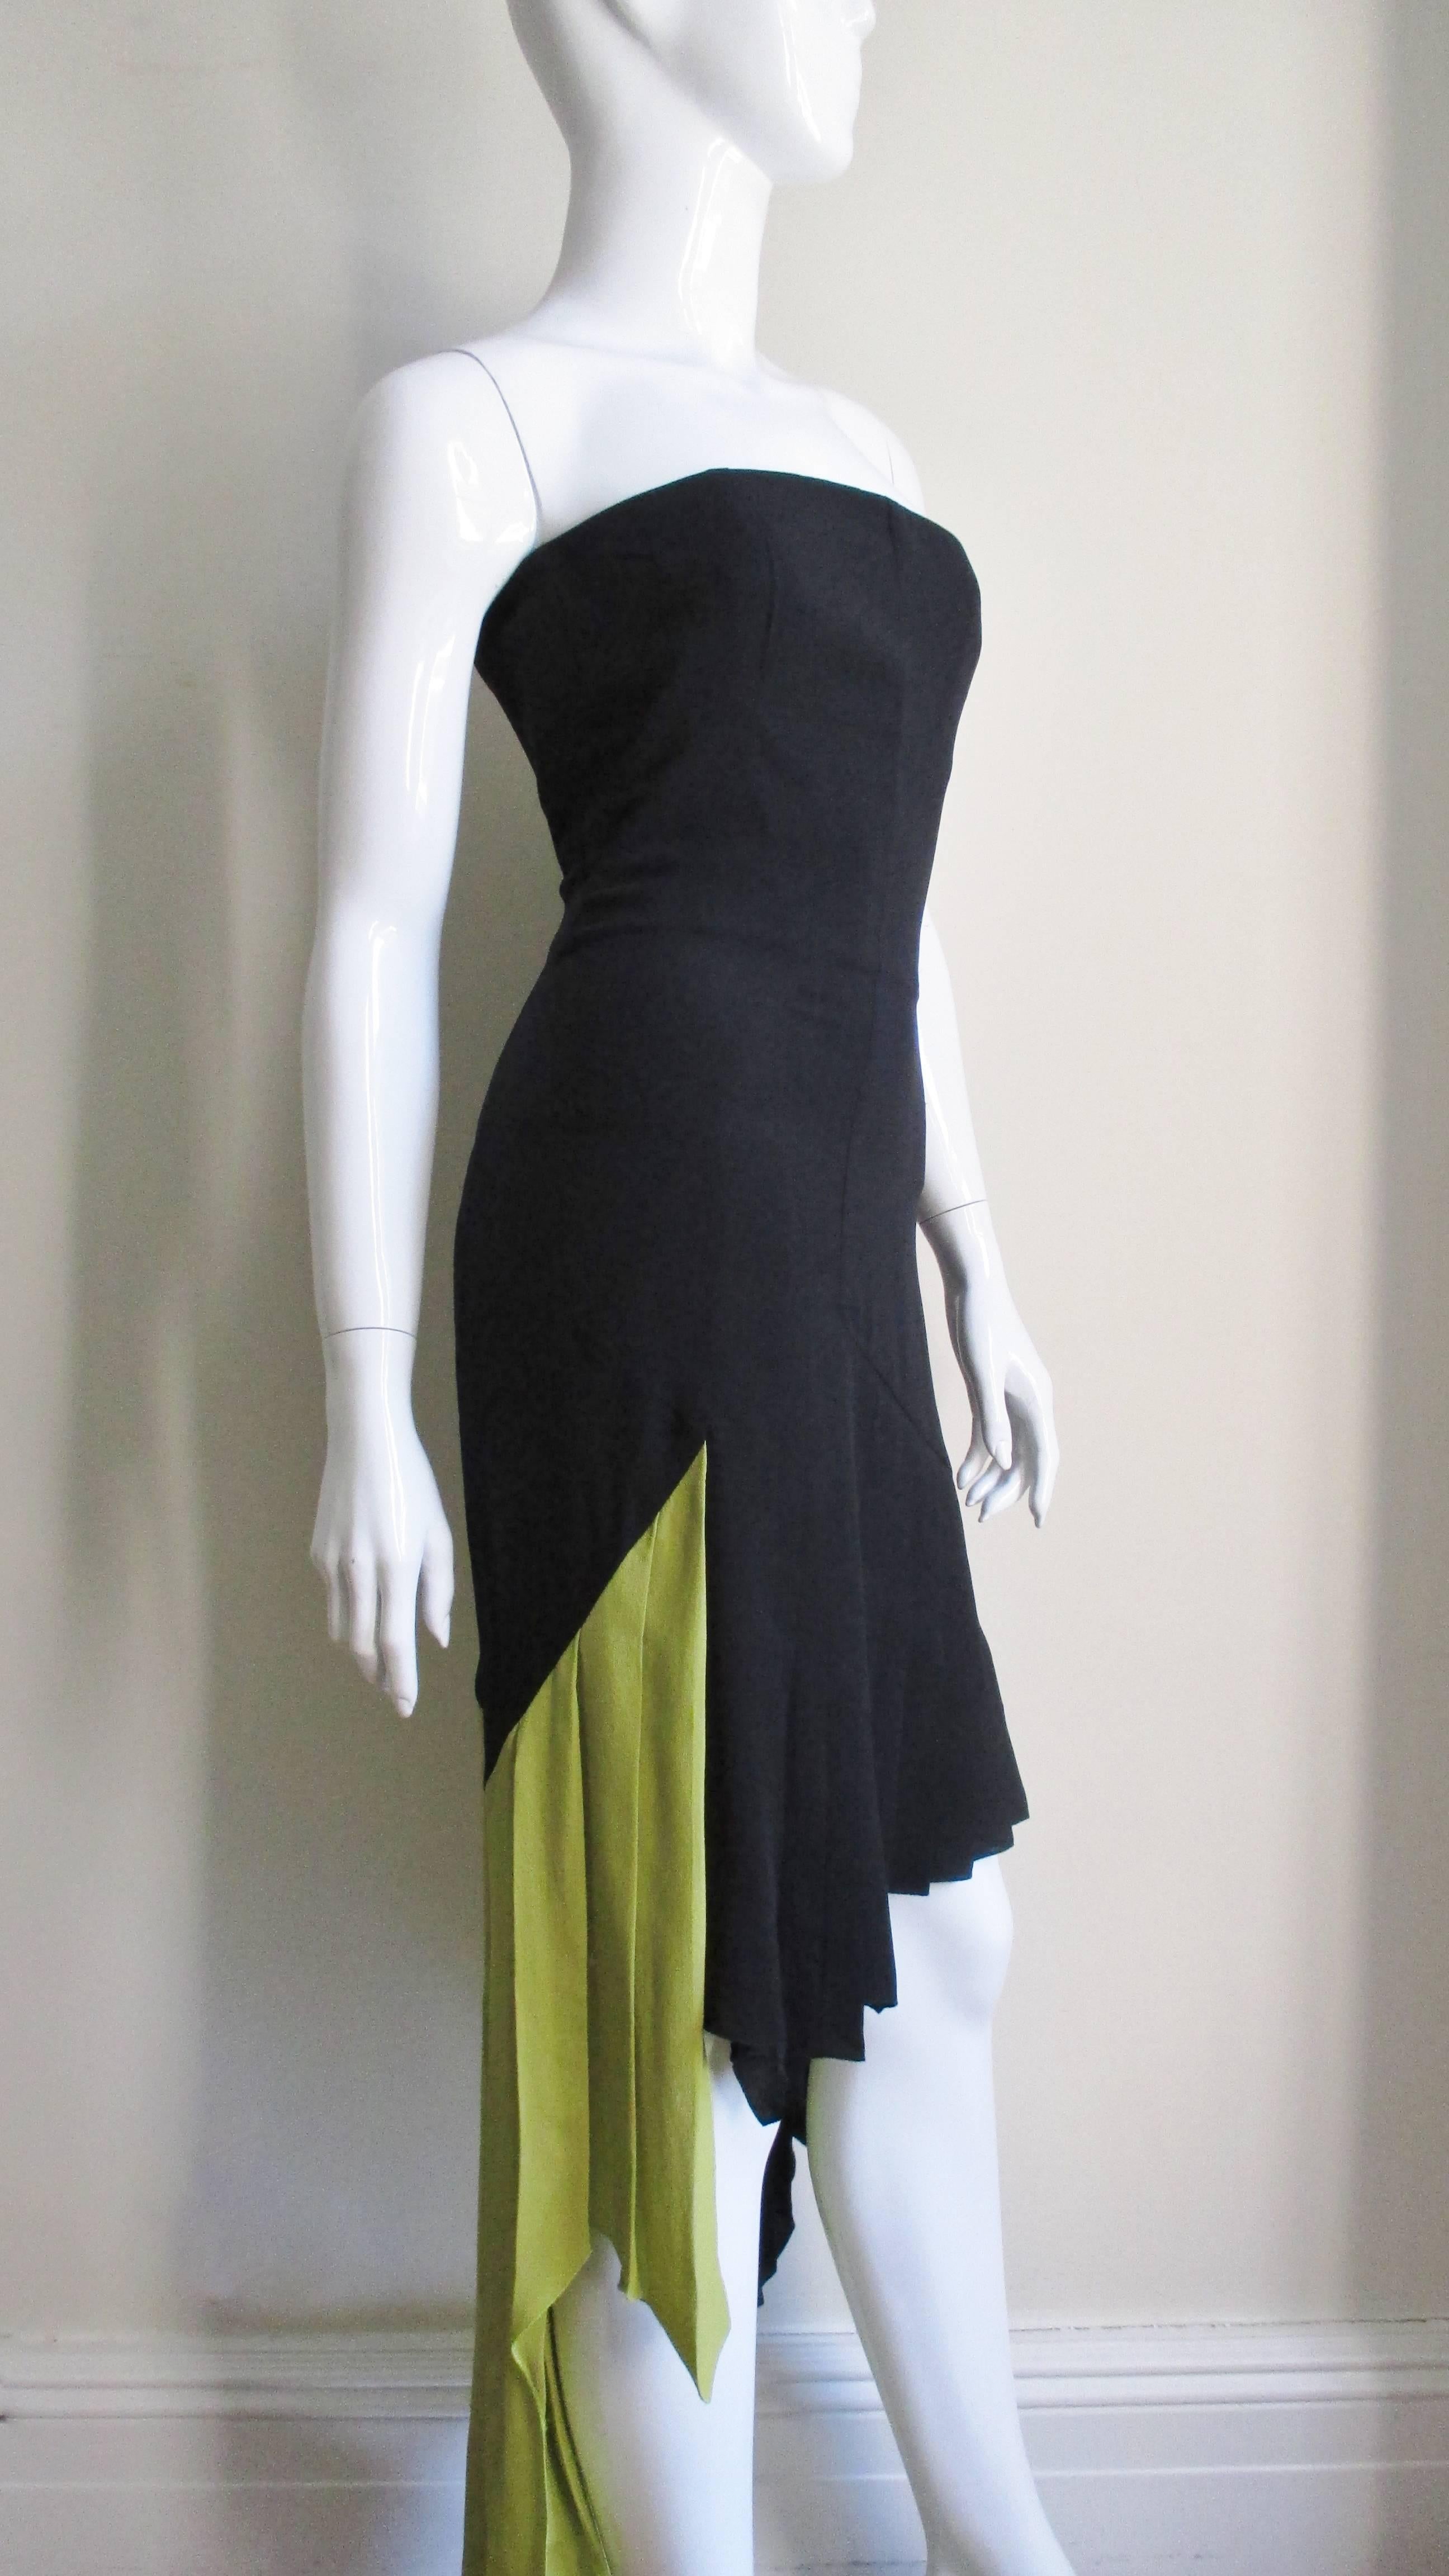 Gianni Versace New Color Block Strapless Dress 1990s In Excellent Condition For Sale In Water Mill, NY